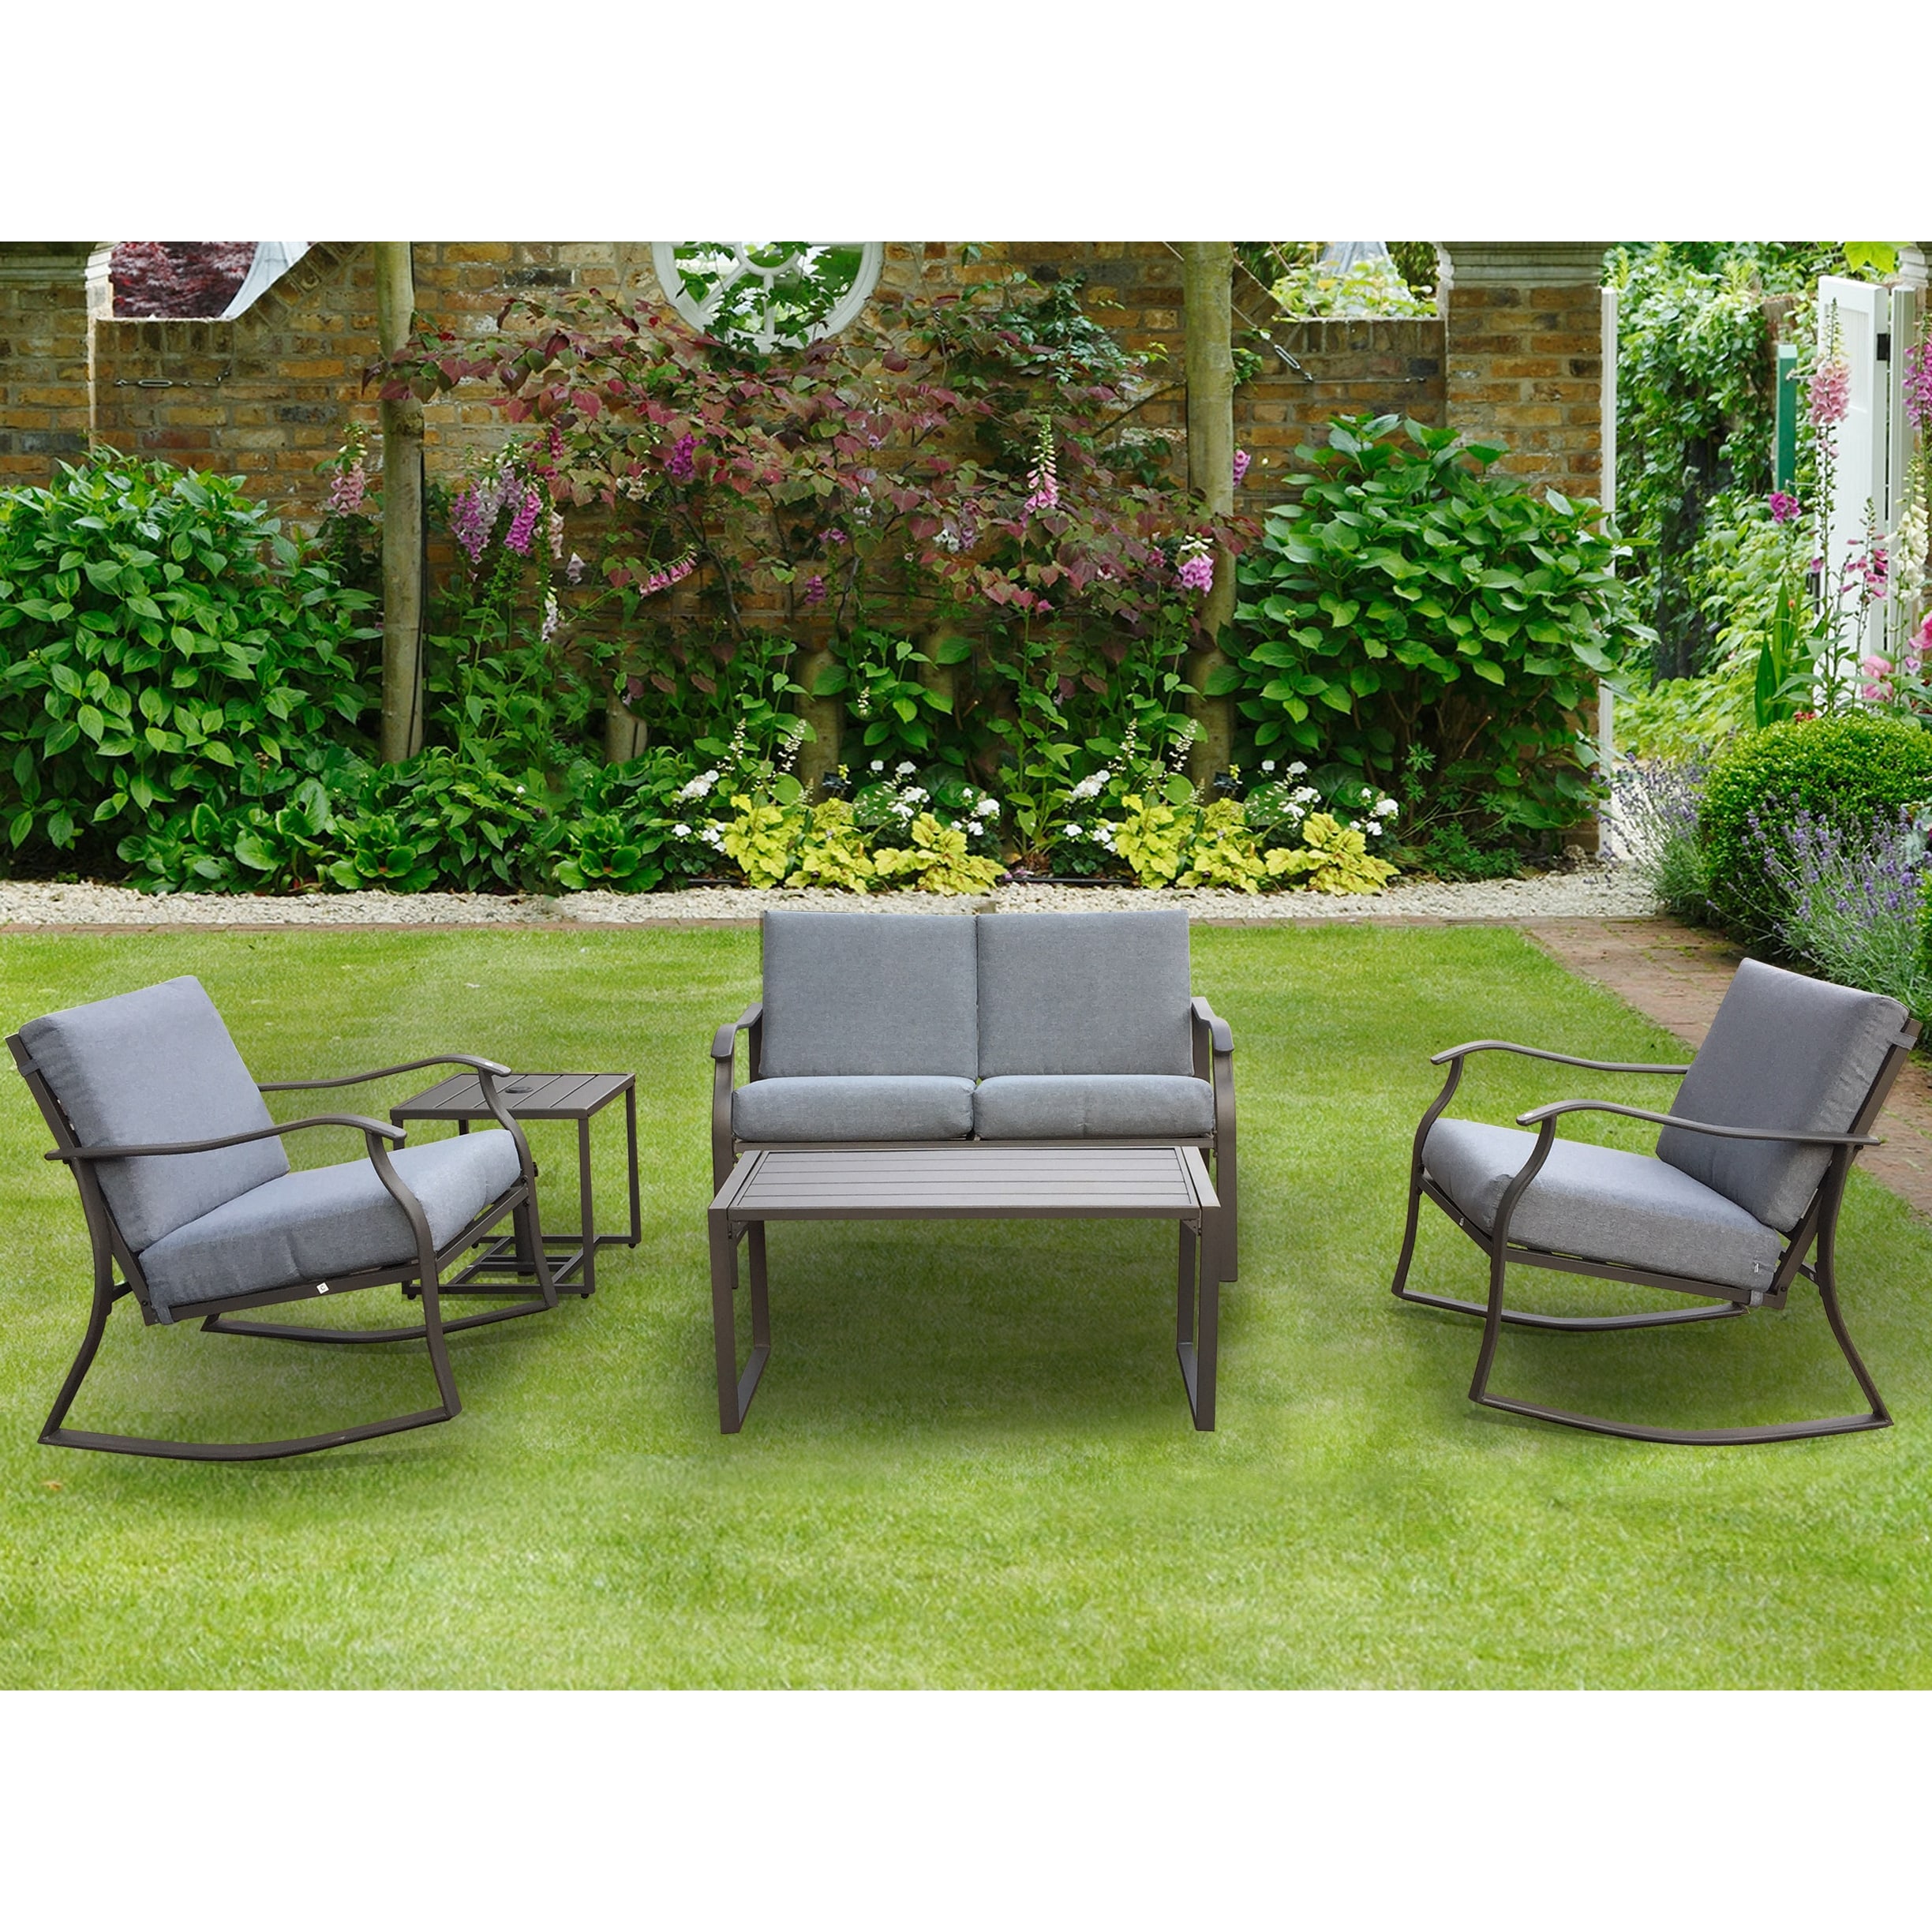 Outdoor Patio 5-piece Furniture Set Metal Loveseat Rocker Chairs Set With Table and Cushions